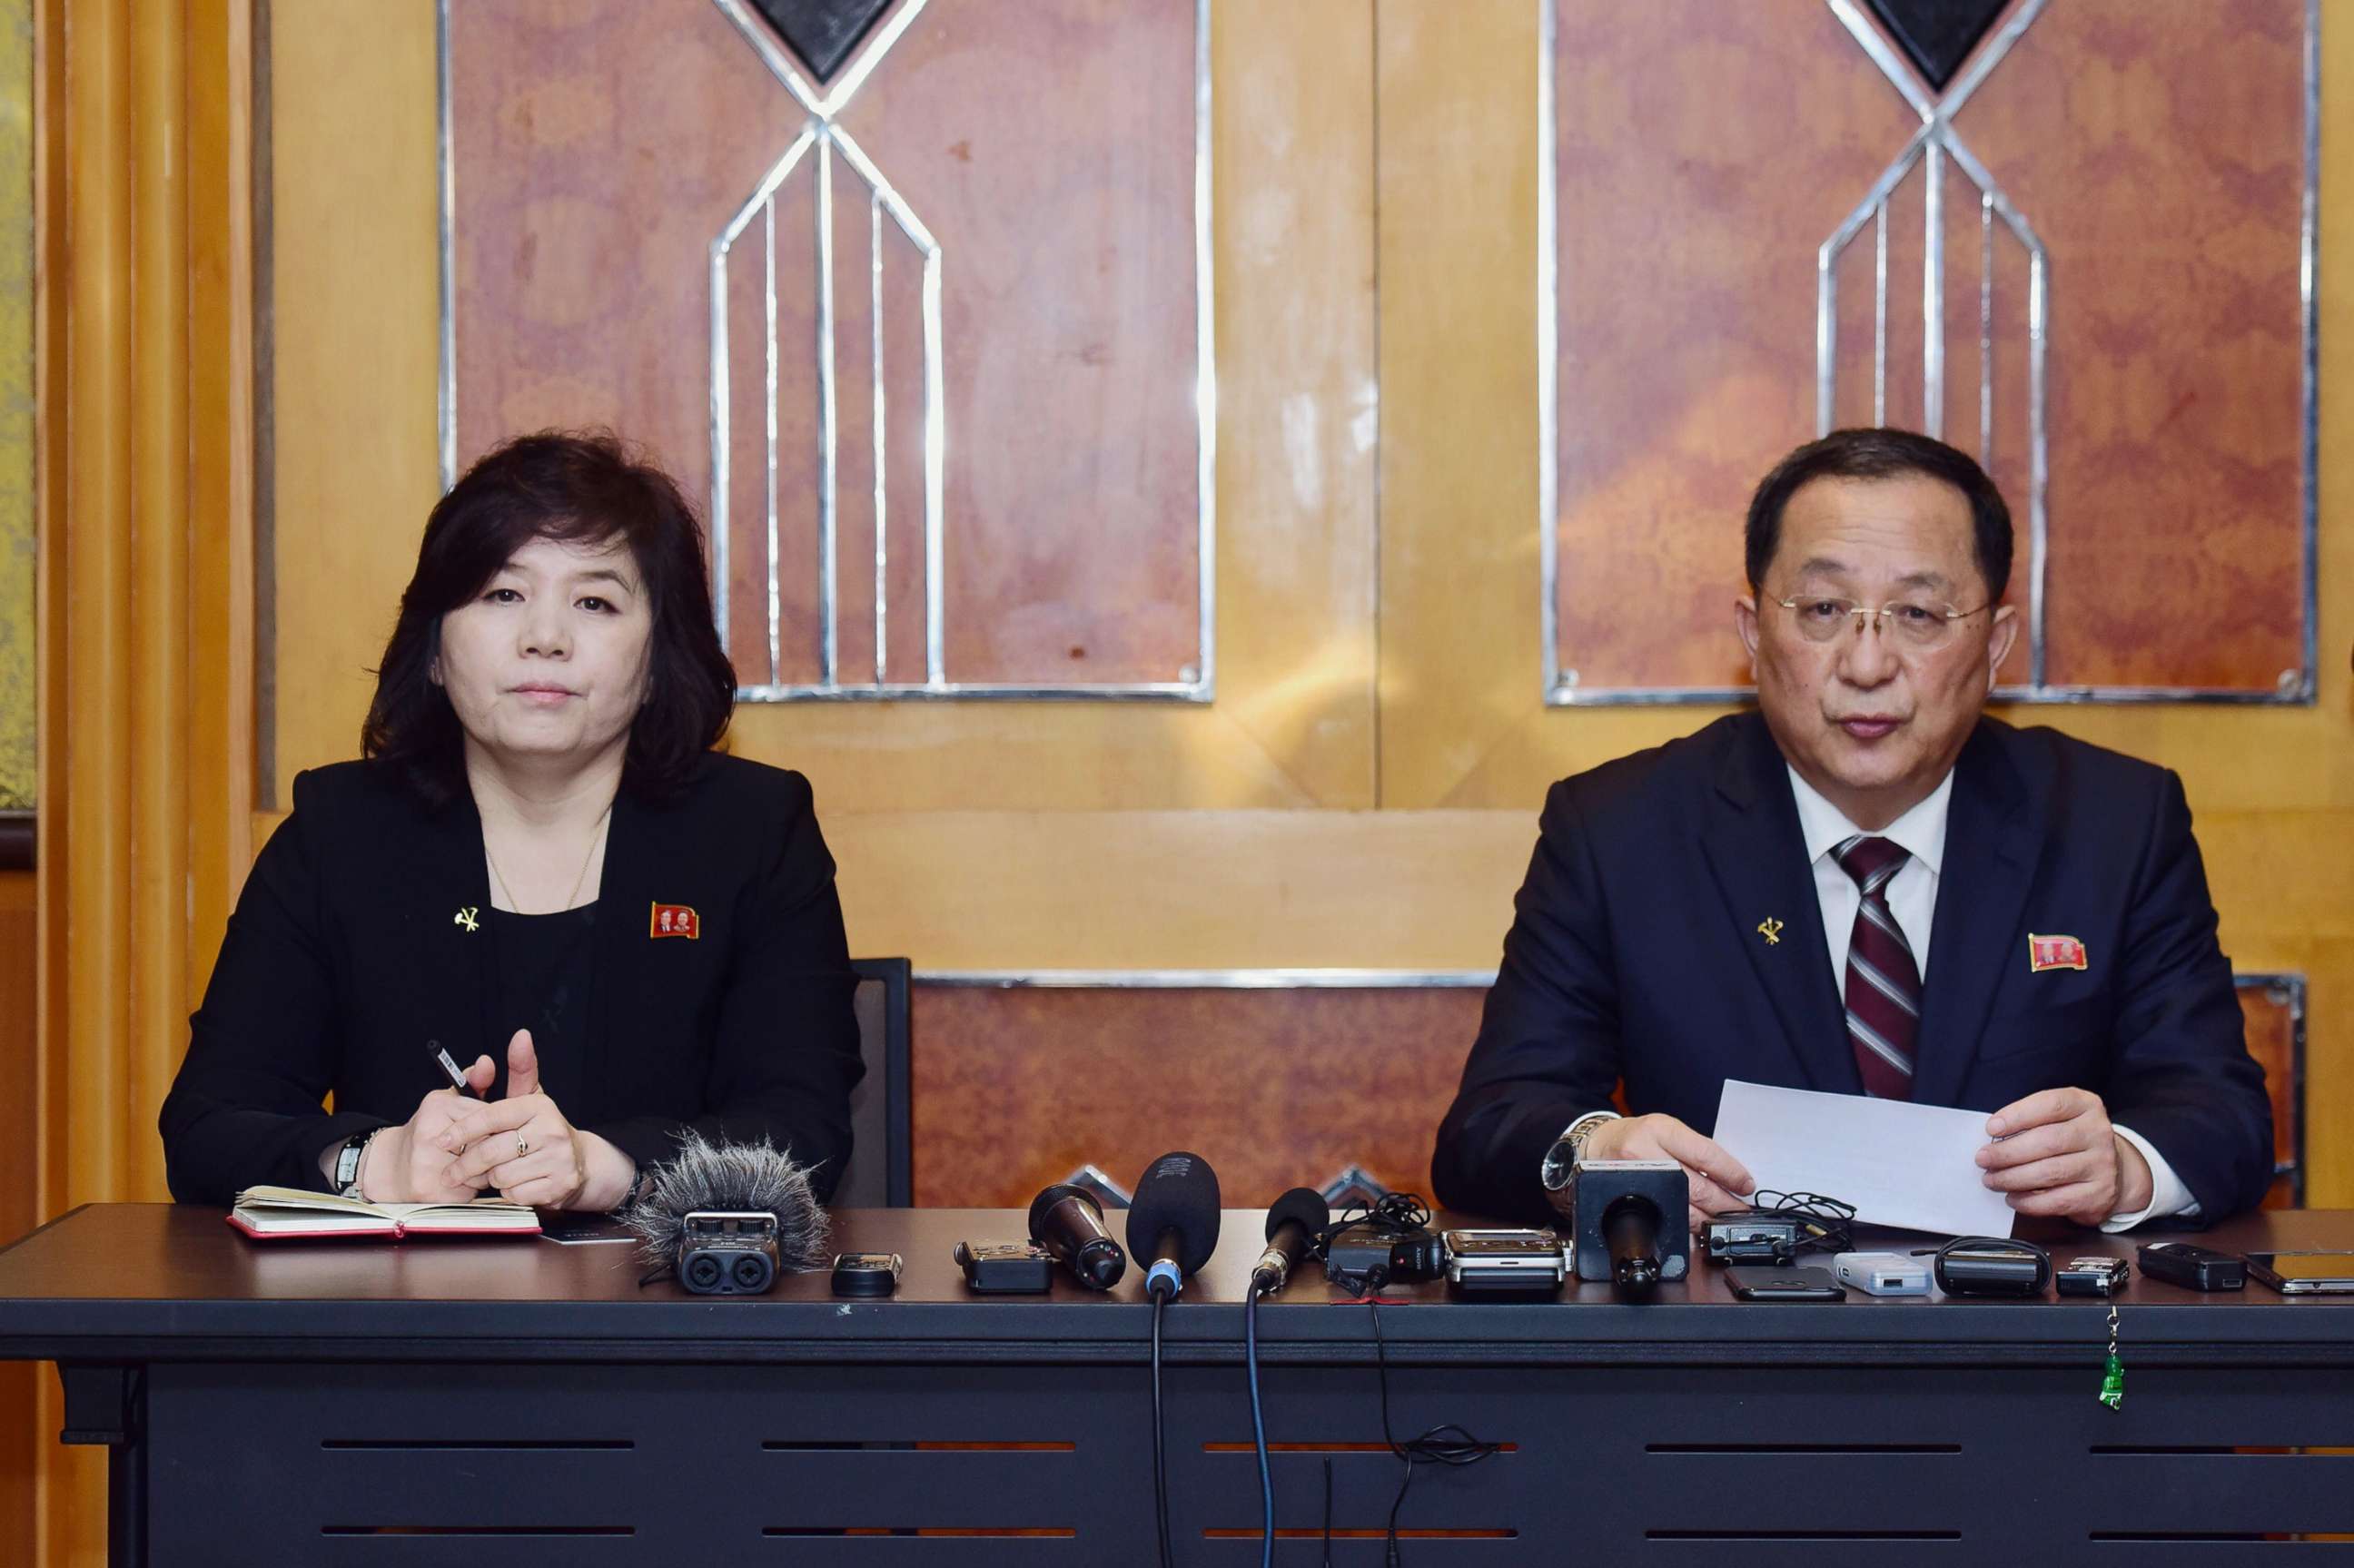 PHOTO: North Korean Foreign Minister Ri Yong Ho, right, speaks as Vice-Minister of Foreign Affairs Choe Son Hui listens during a press conference in Hanoi, March 1, 2019, following the US-North Korea summit which ended abruptly.